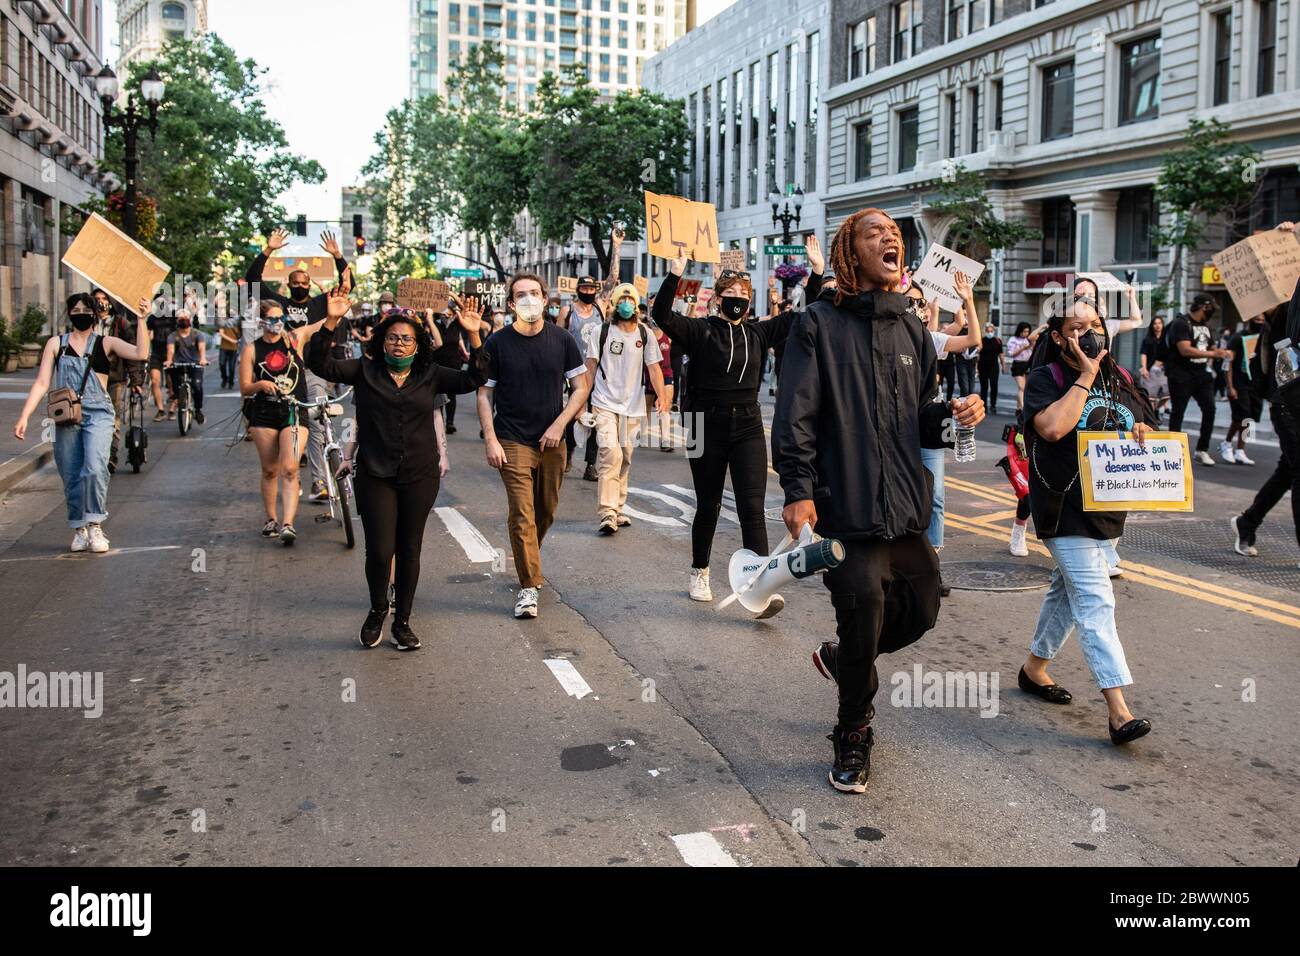 Oakland, Ca. 2nd June, 2020. Protestors march through Oakland, California on June 2, 2020 after the death of George Floyd. Credit: Chris Tuite/Image Space/Media Punch/Alamy Live News Stock Photo